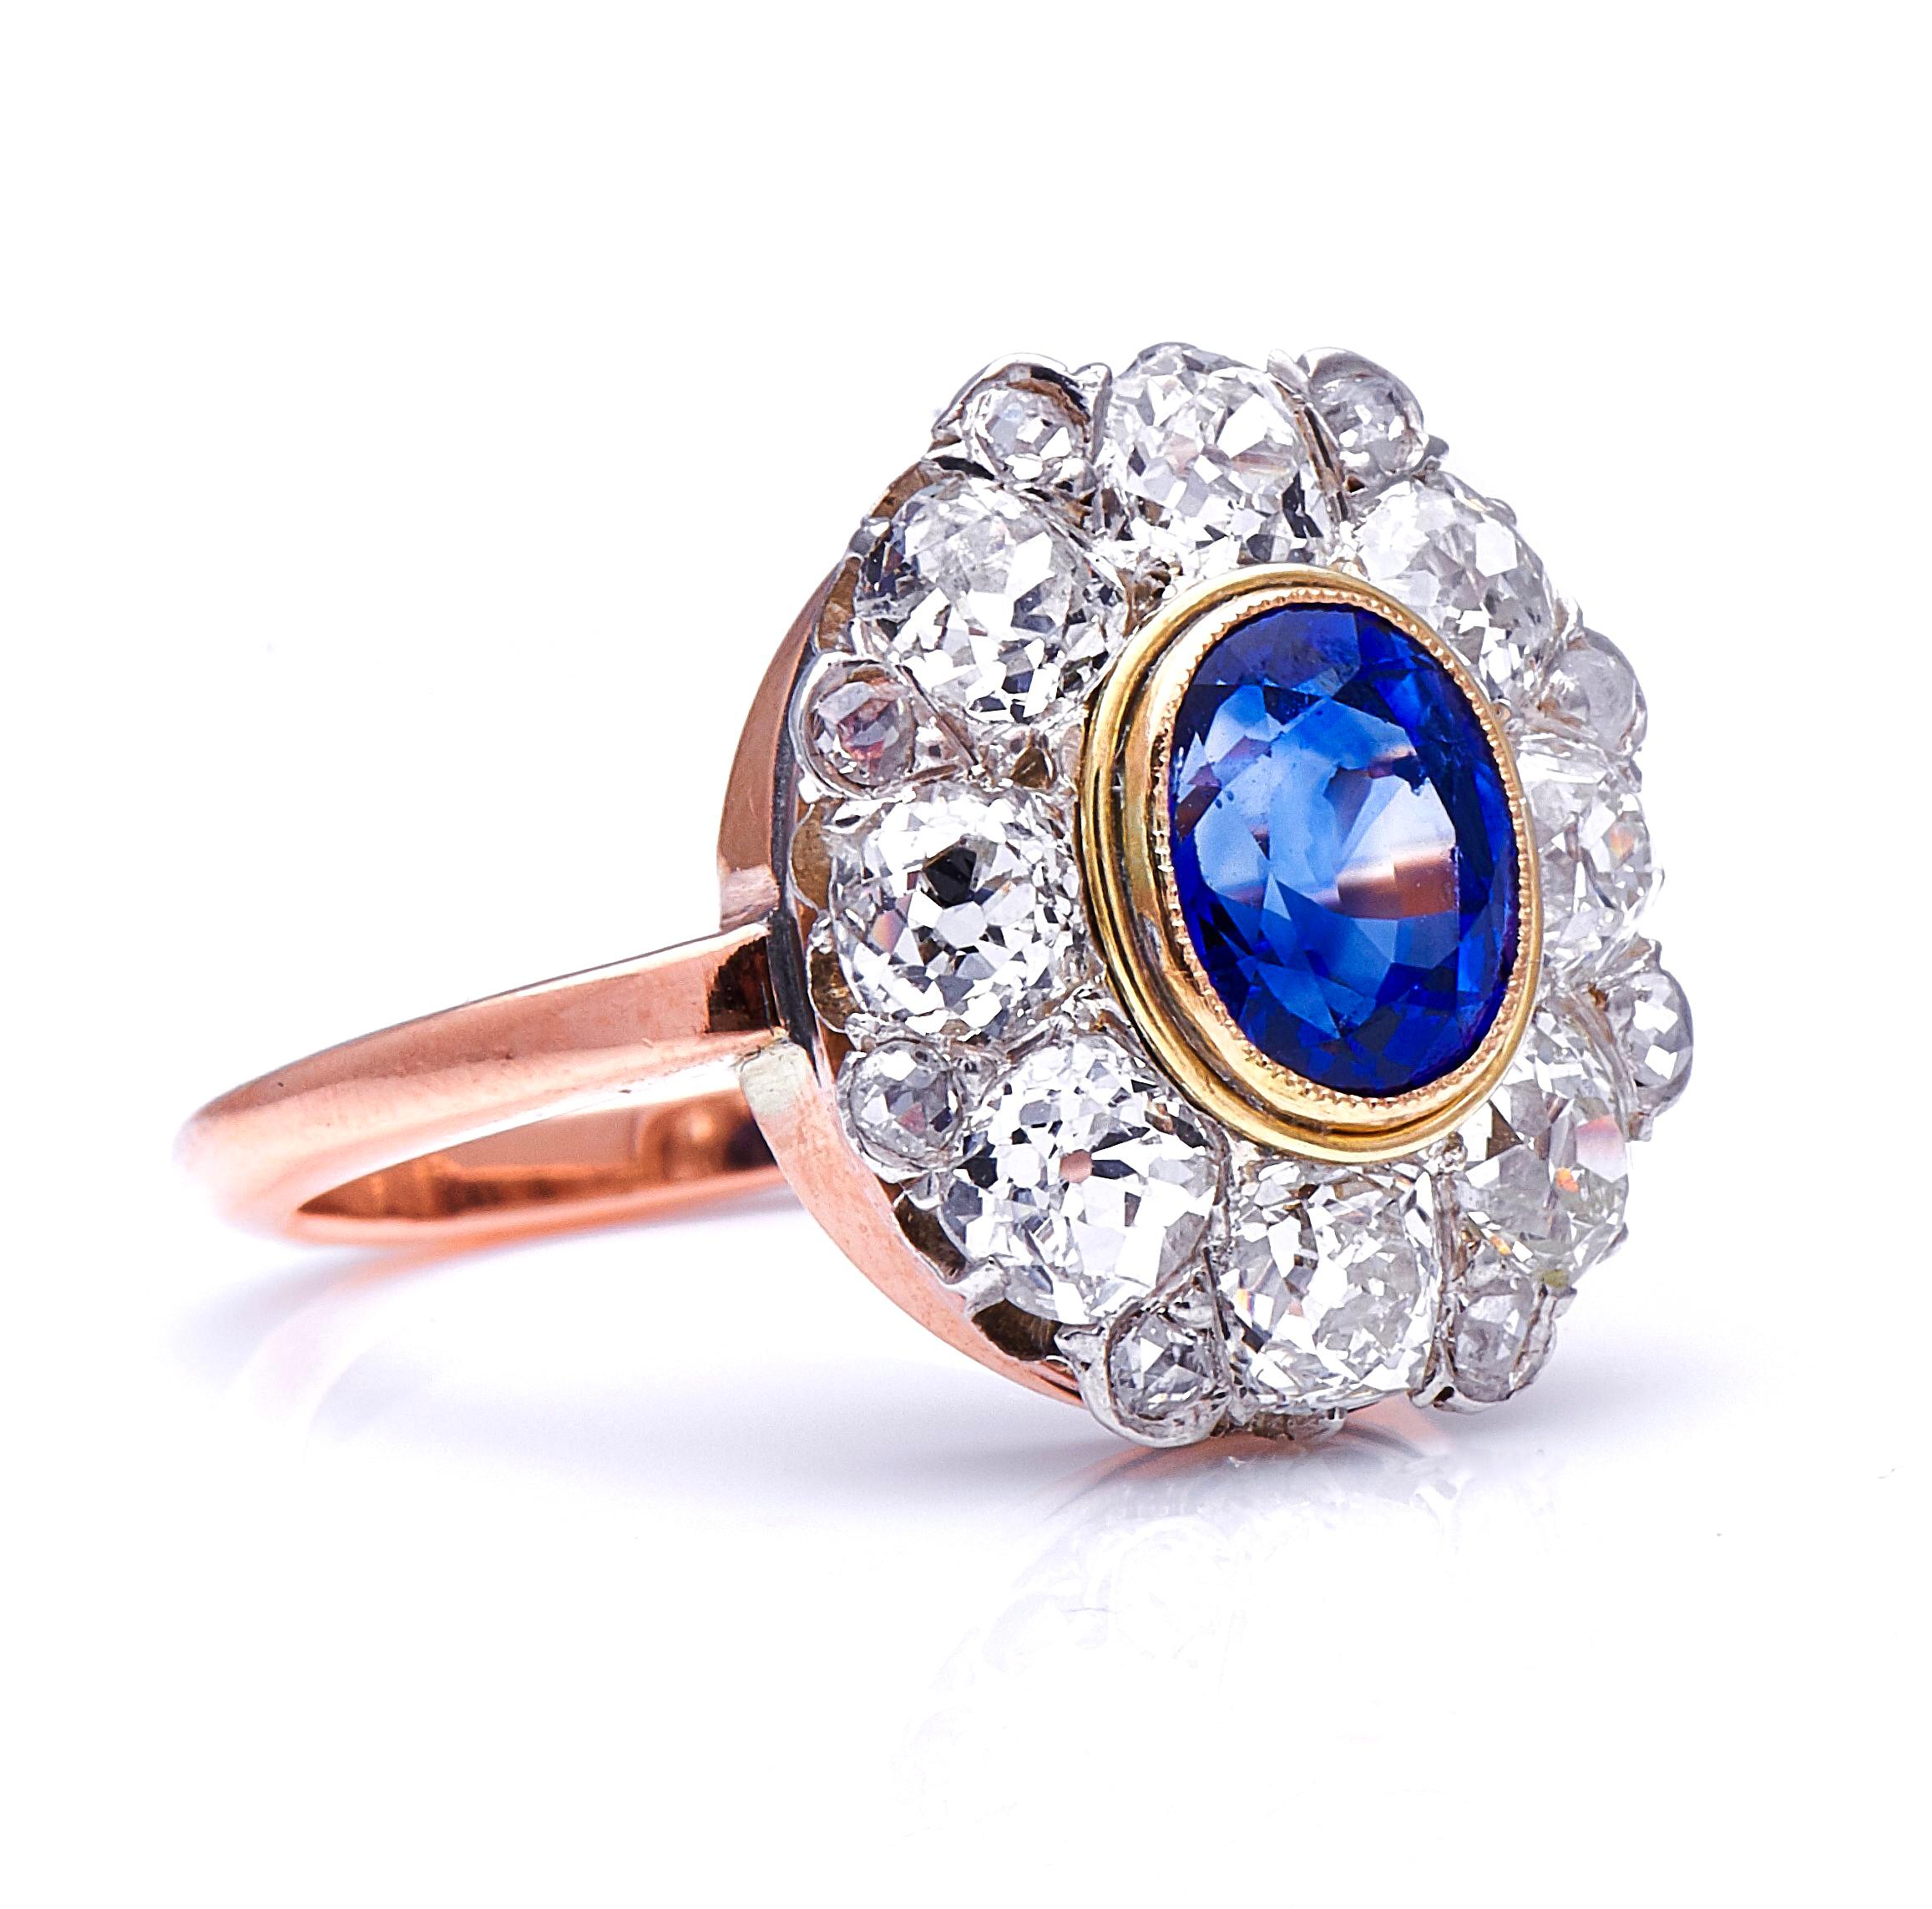 French, Sapphire and diamond ring, circa 1900. 

This cluster ring comes from a turning point in jewellery design – the very end of the 19th century, which heralded the beginning of the era known as the ‘Belle Époque’. This setting, while still in